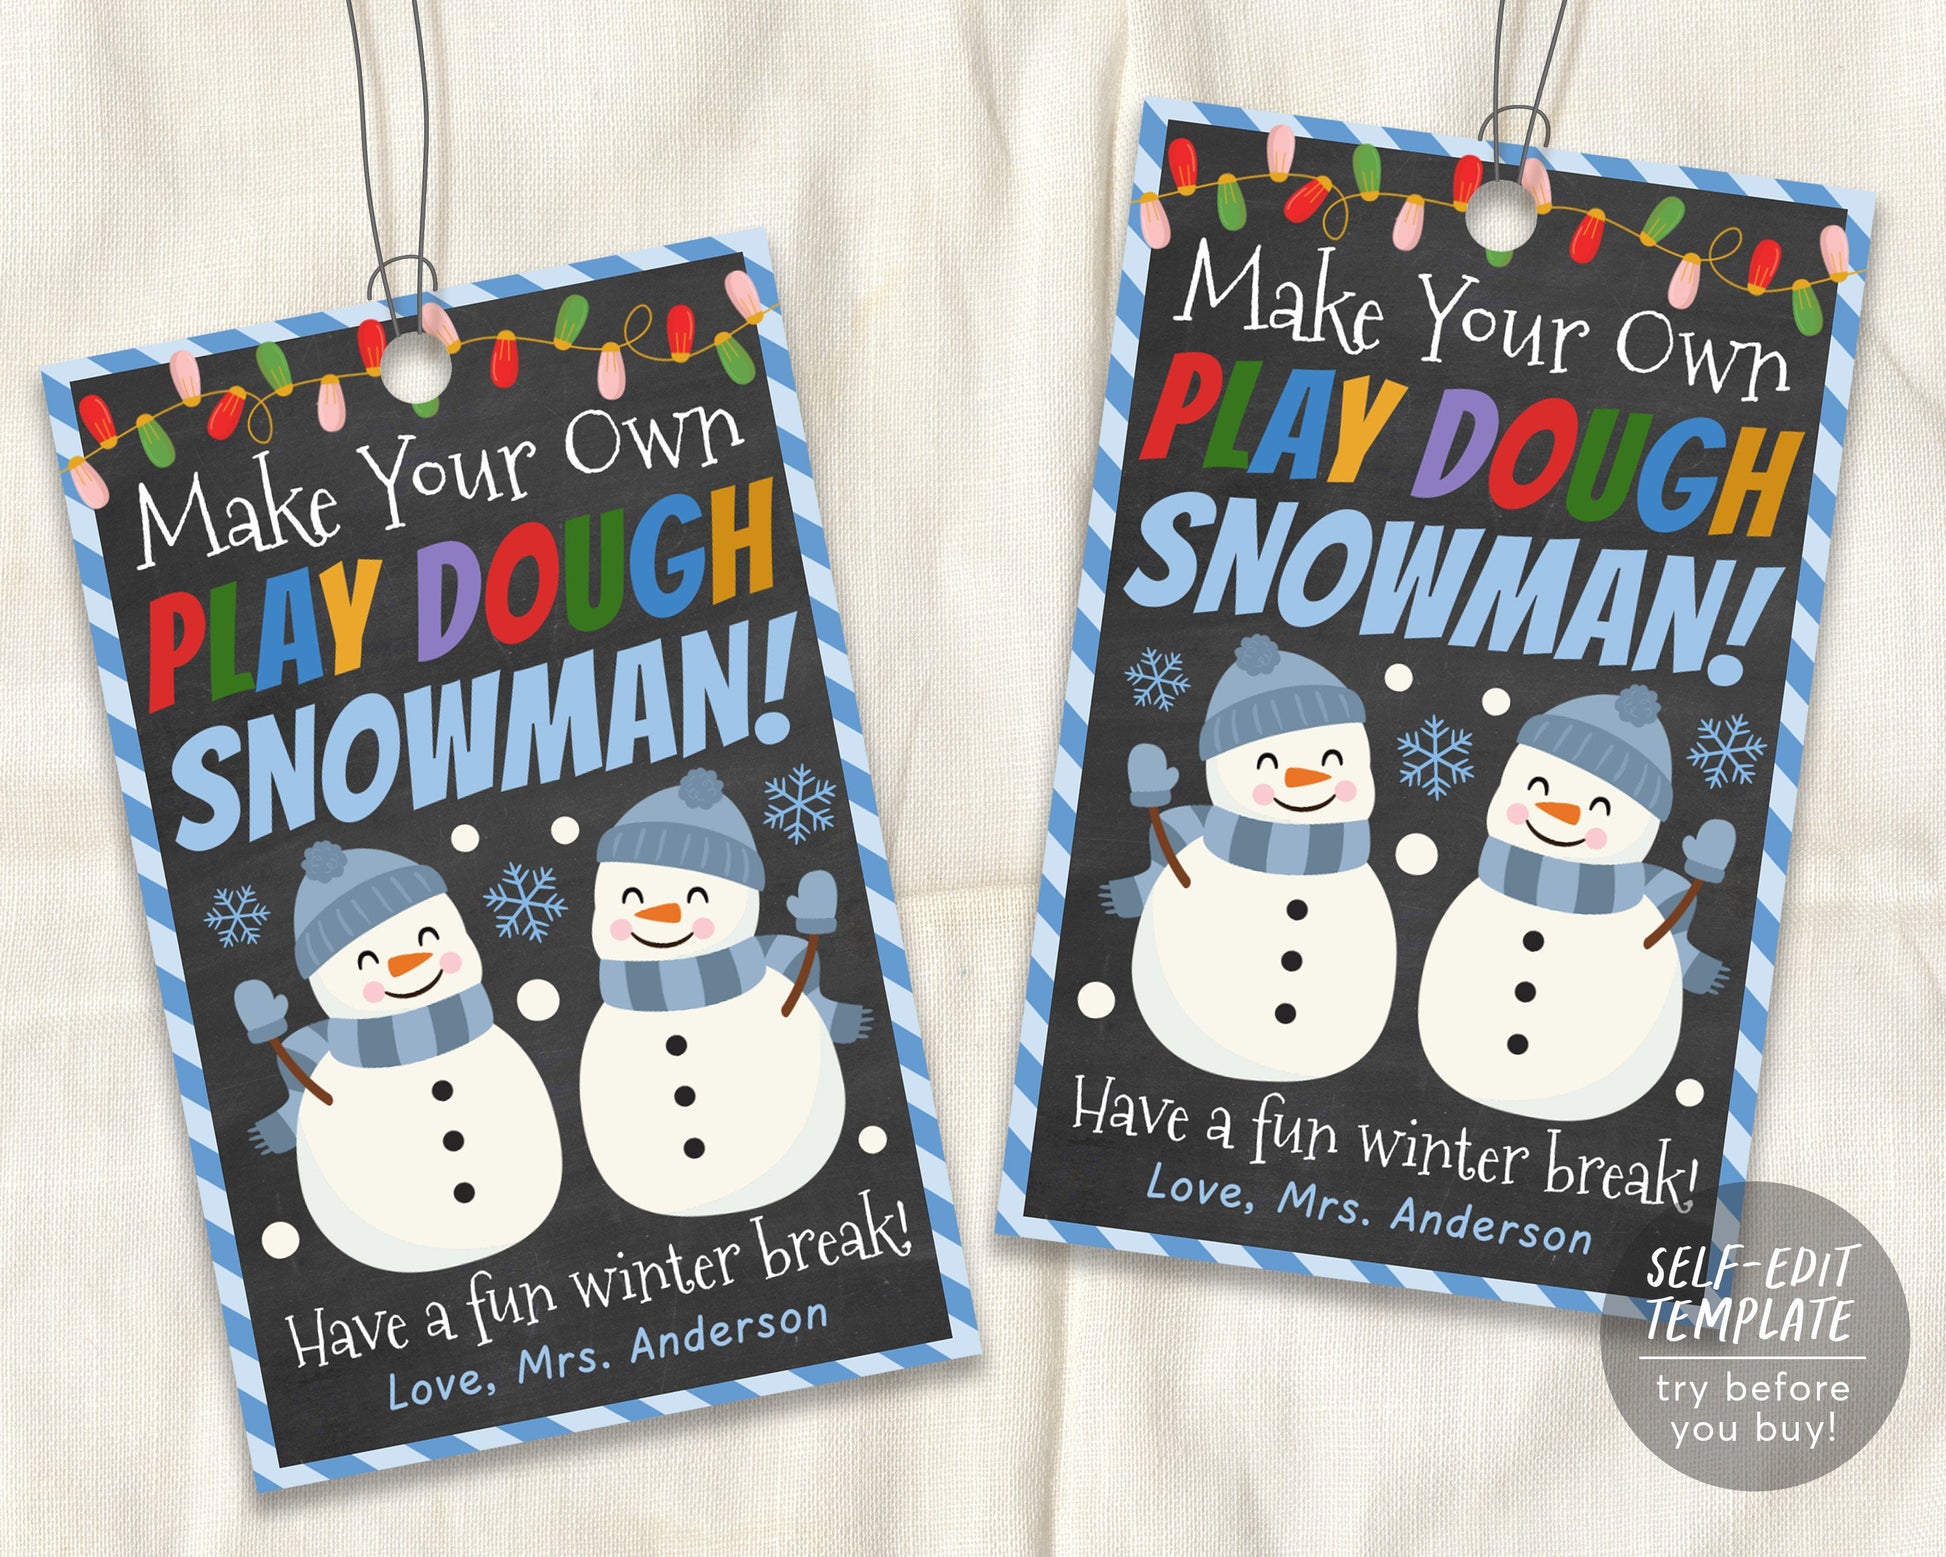 What do you think of making your own gift tags instead of buying them?